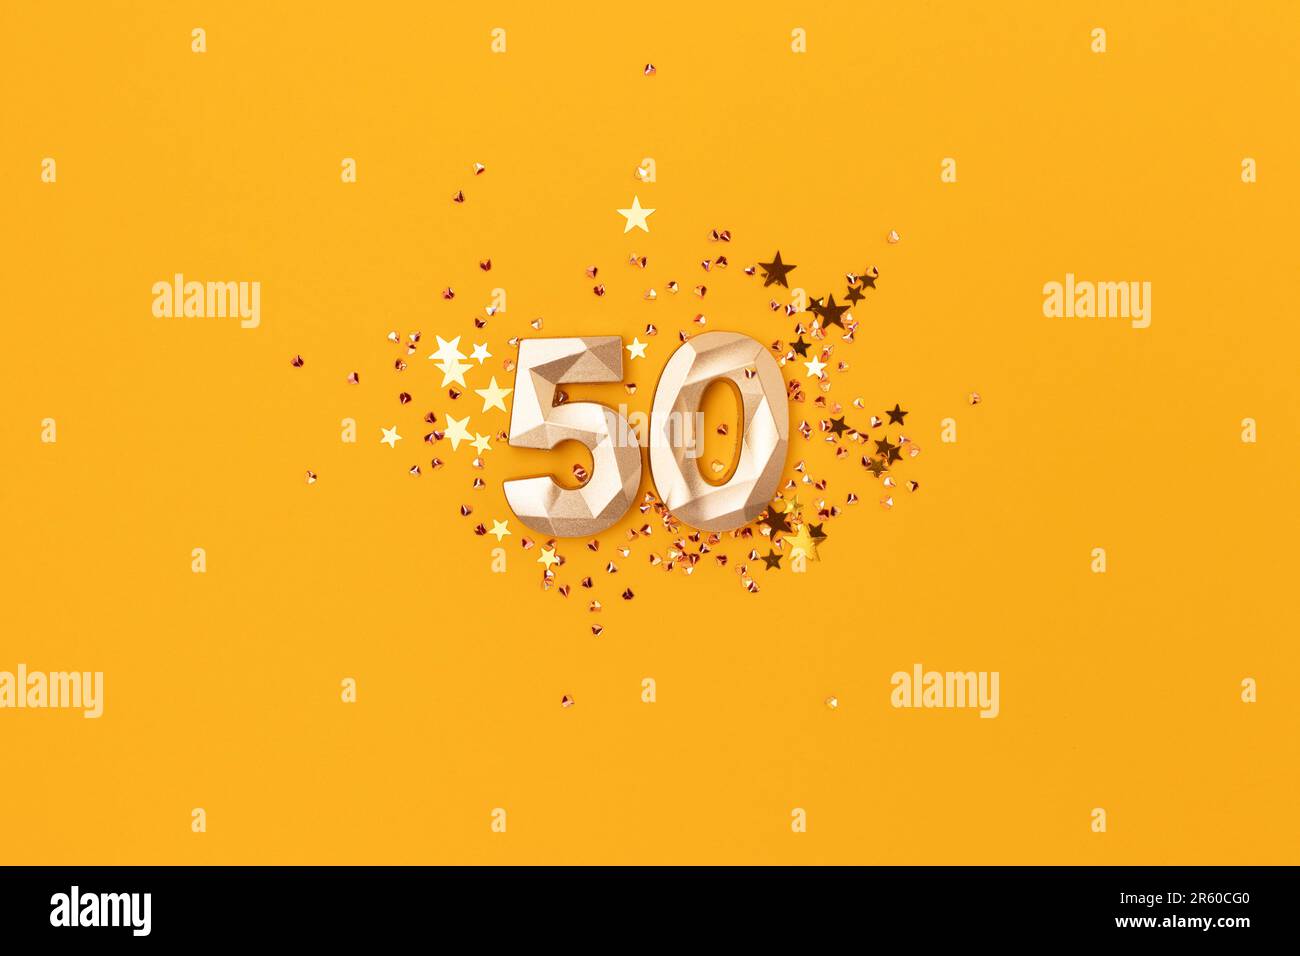 Gold colored number 50 and stars confetti on a yellow background. Festive compisition. Stock Photo